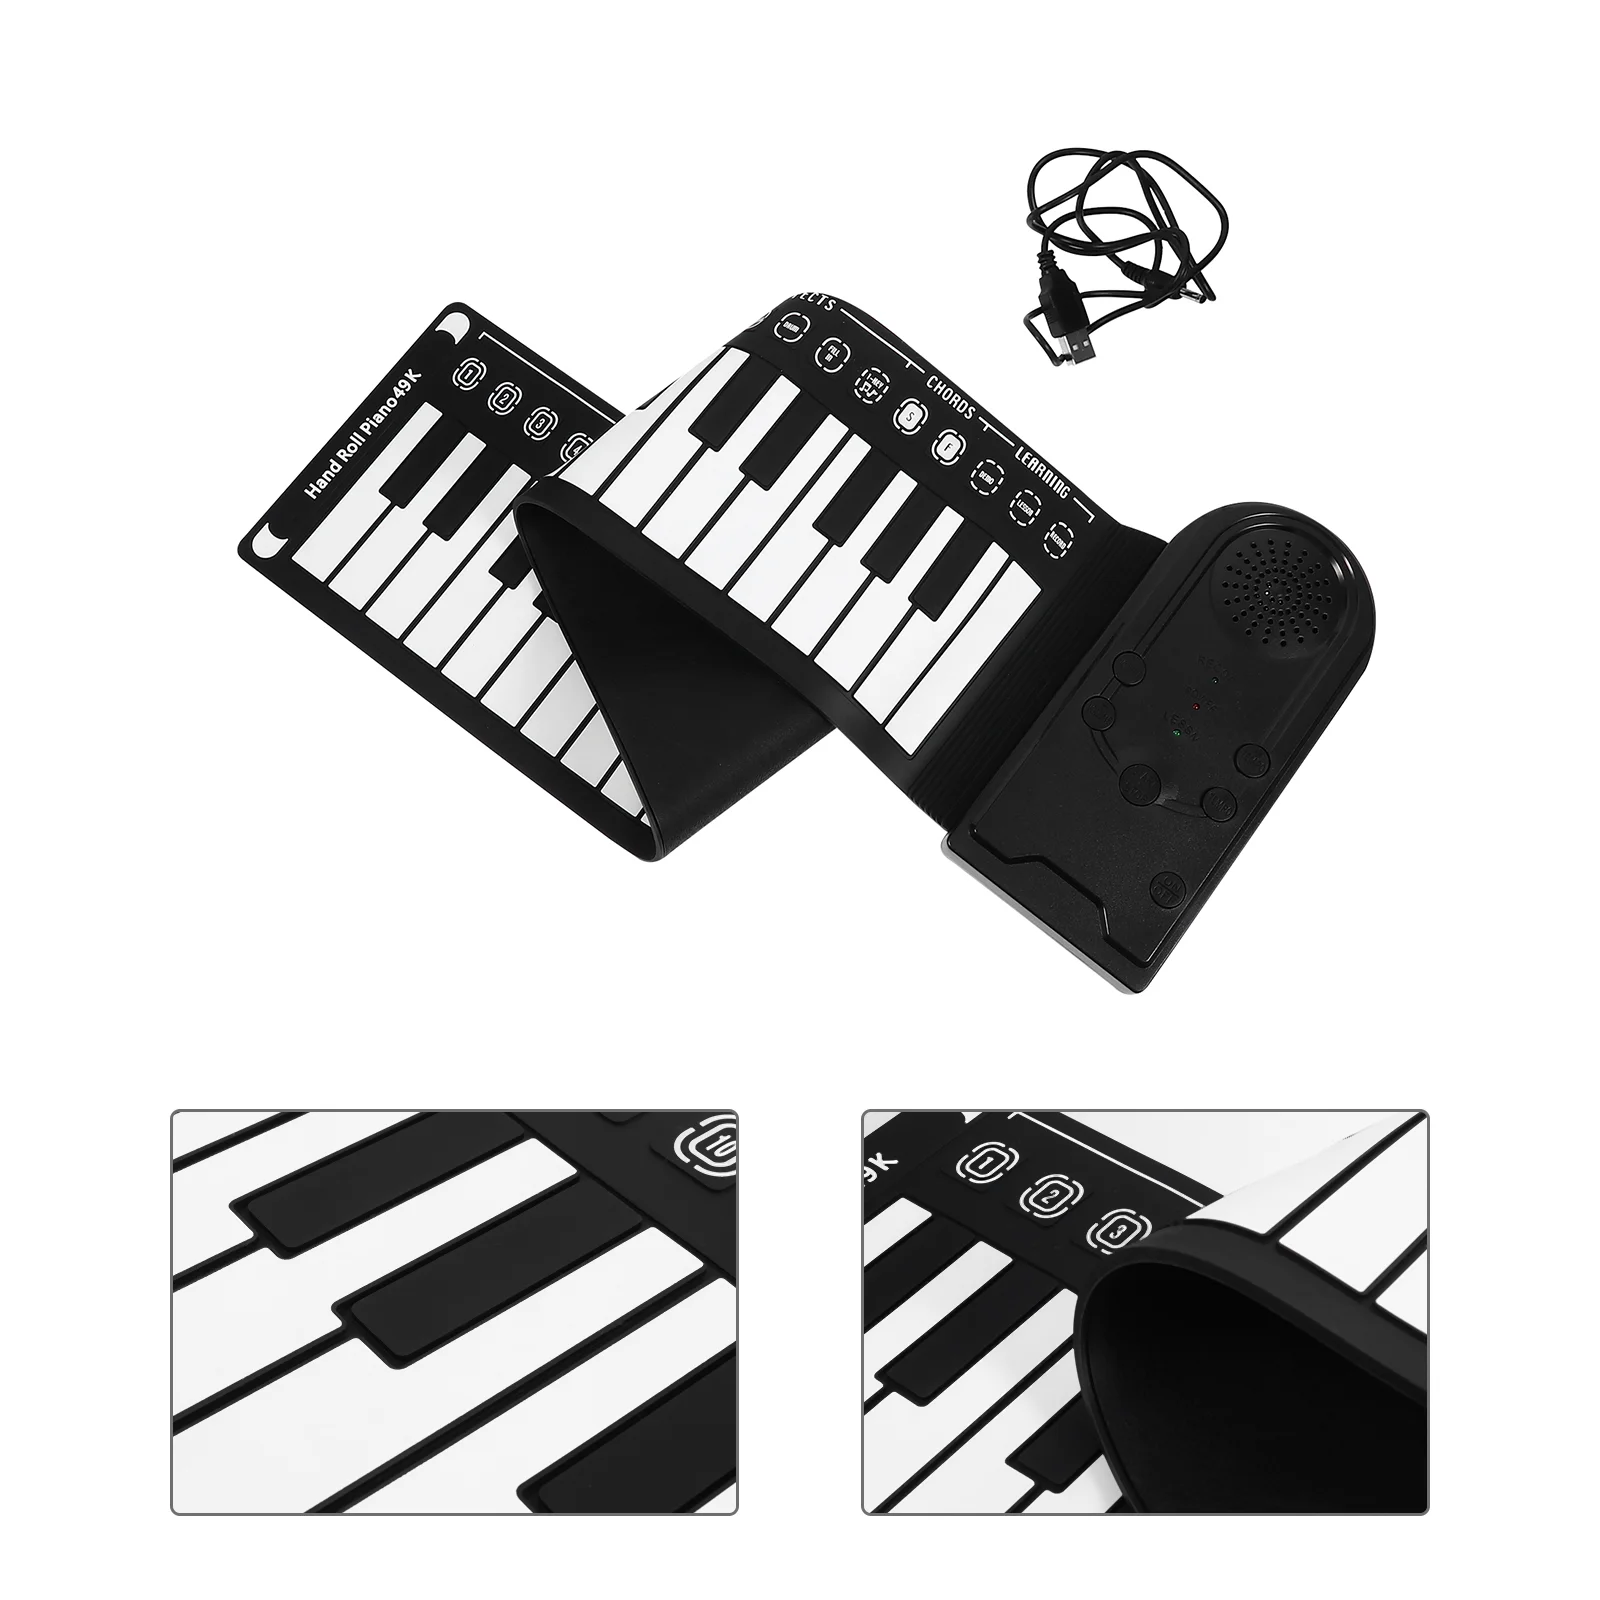 

49 Keys Roll Piano Musical Instrument Beginner Hand Rolled Electronic Electric Folding Keyboard Synthesizer Instruments